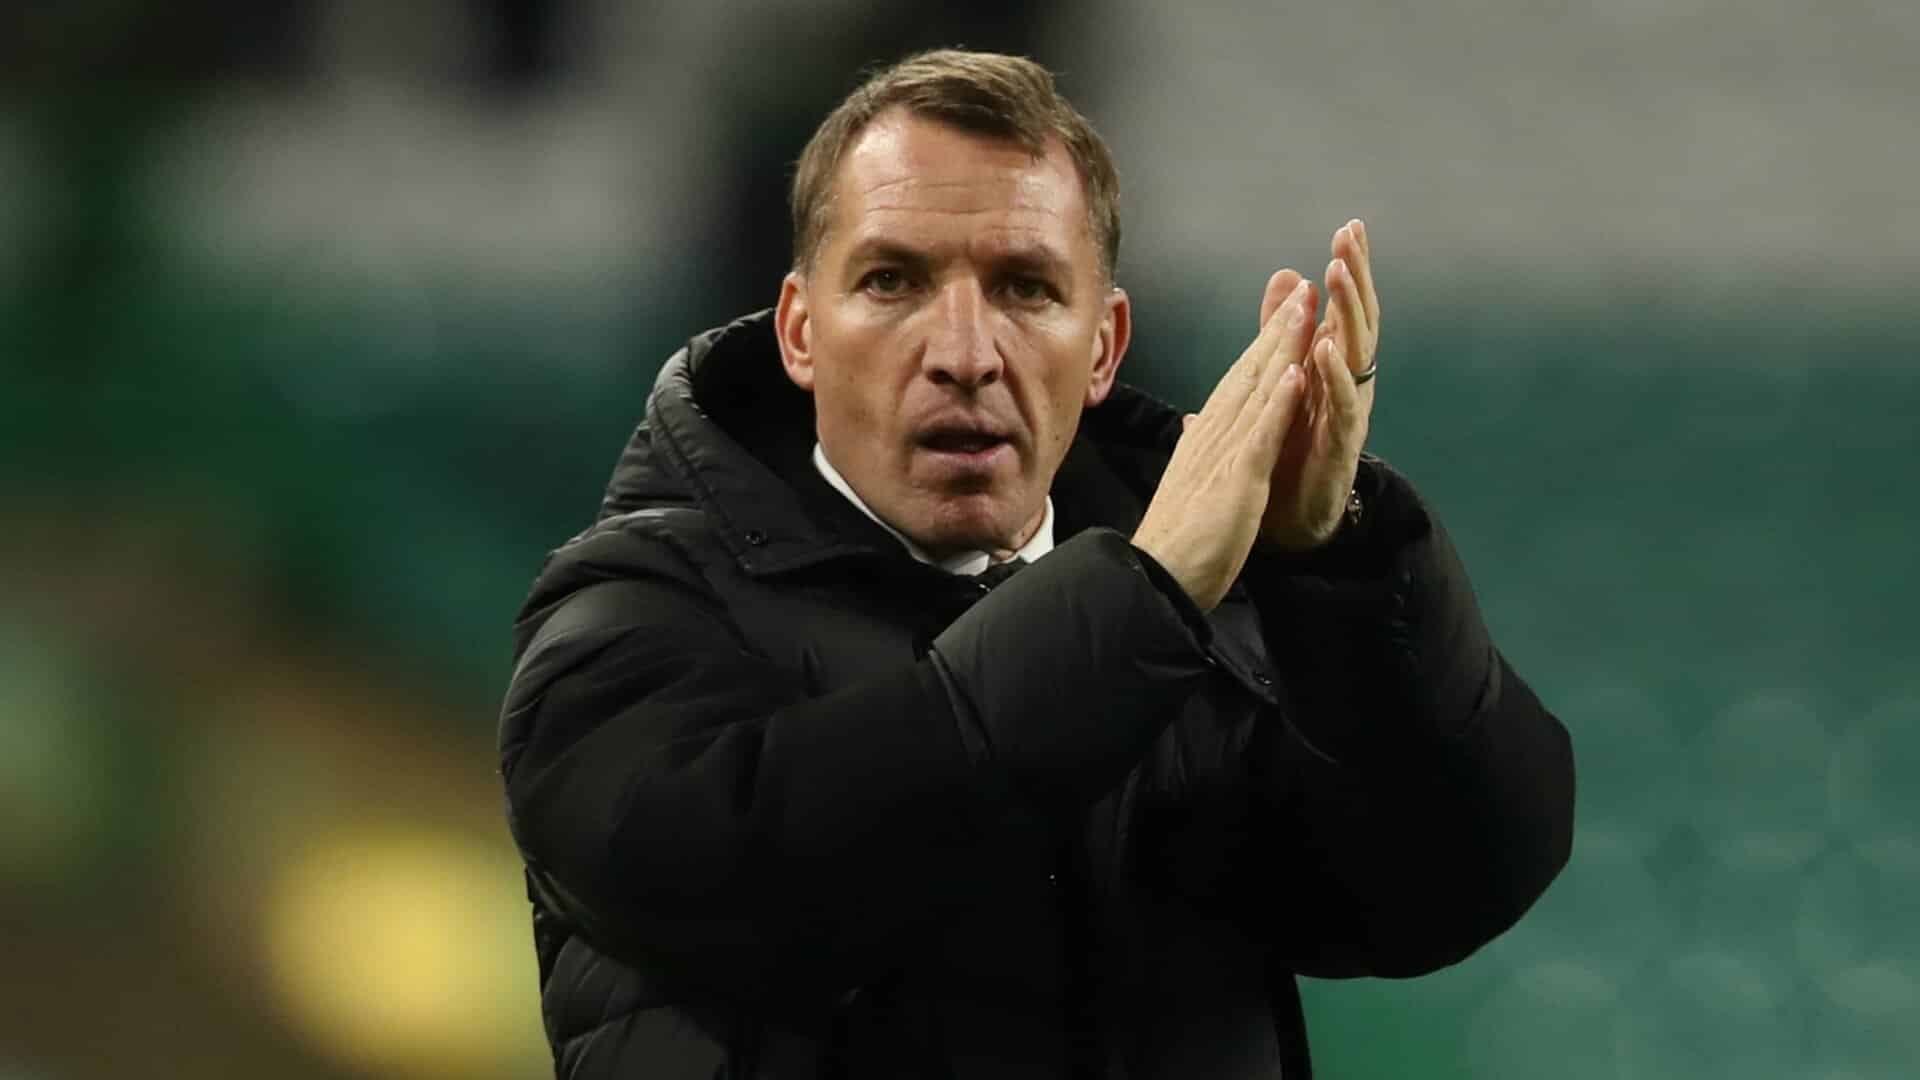 Brendan Rodgers Doesn’t Want To Stockpile Players